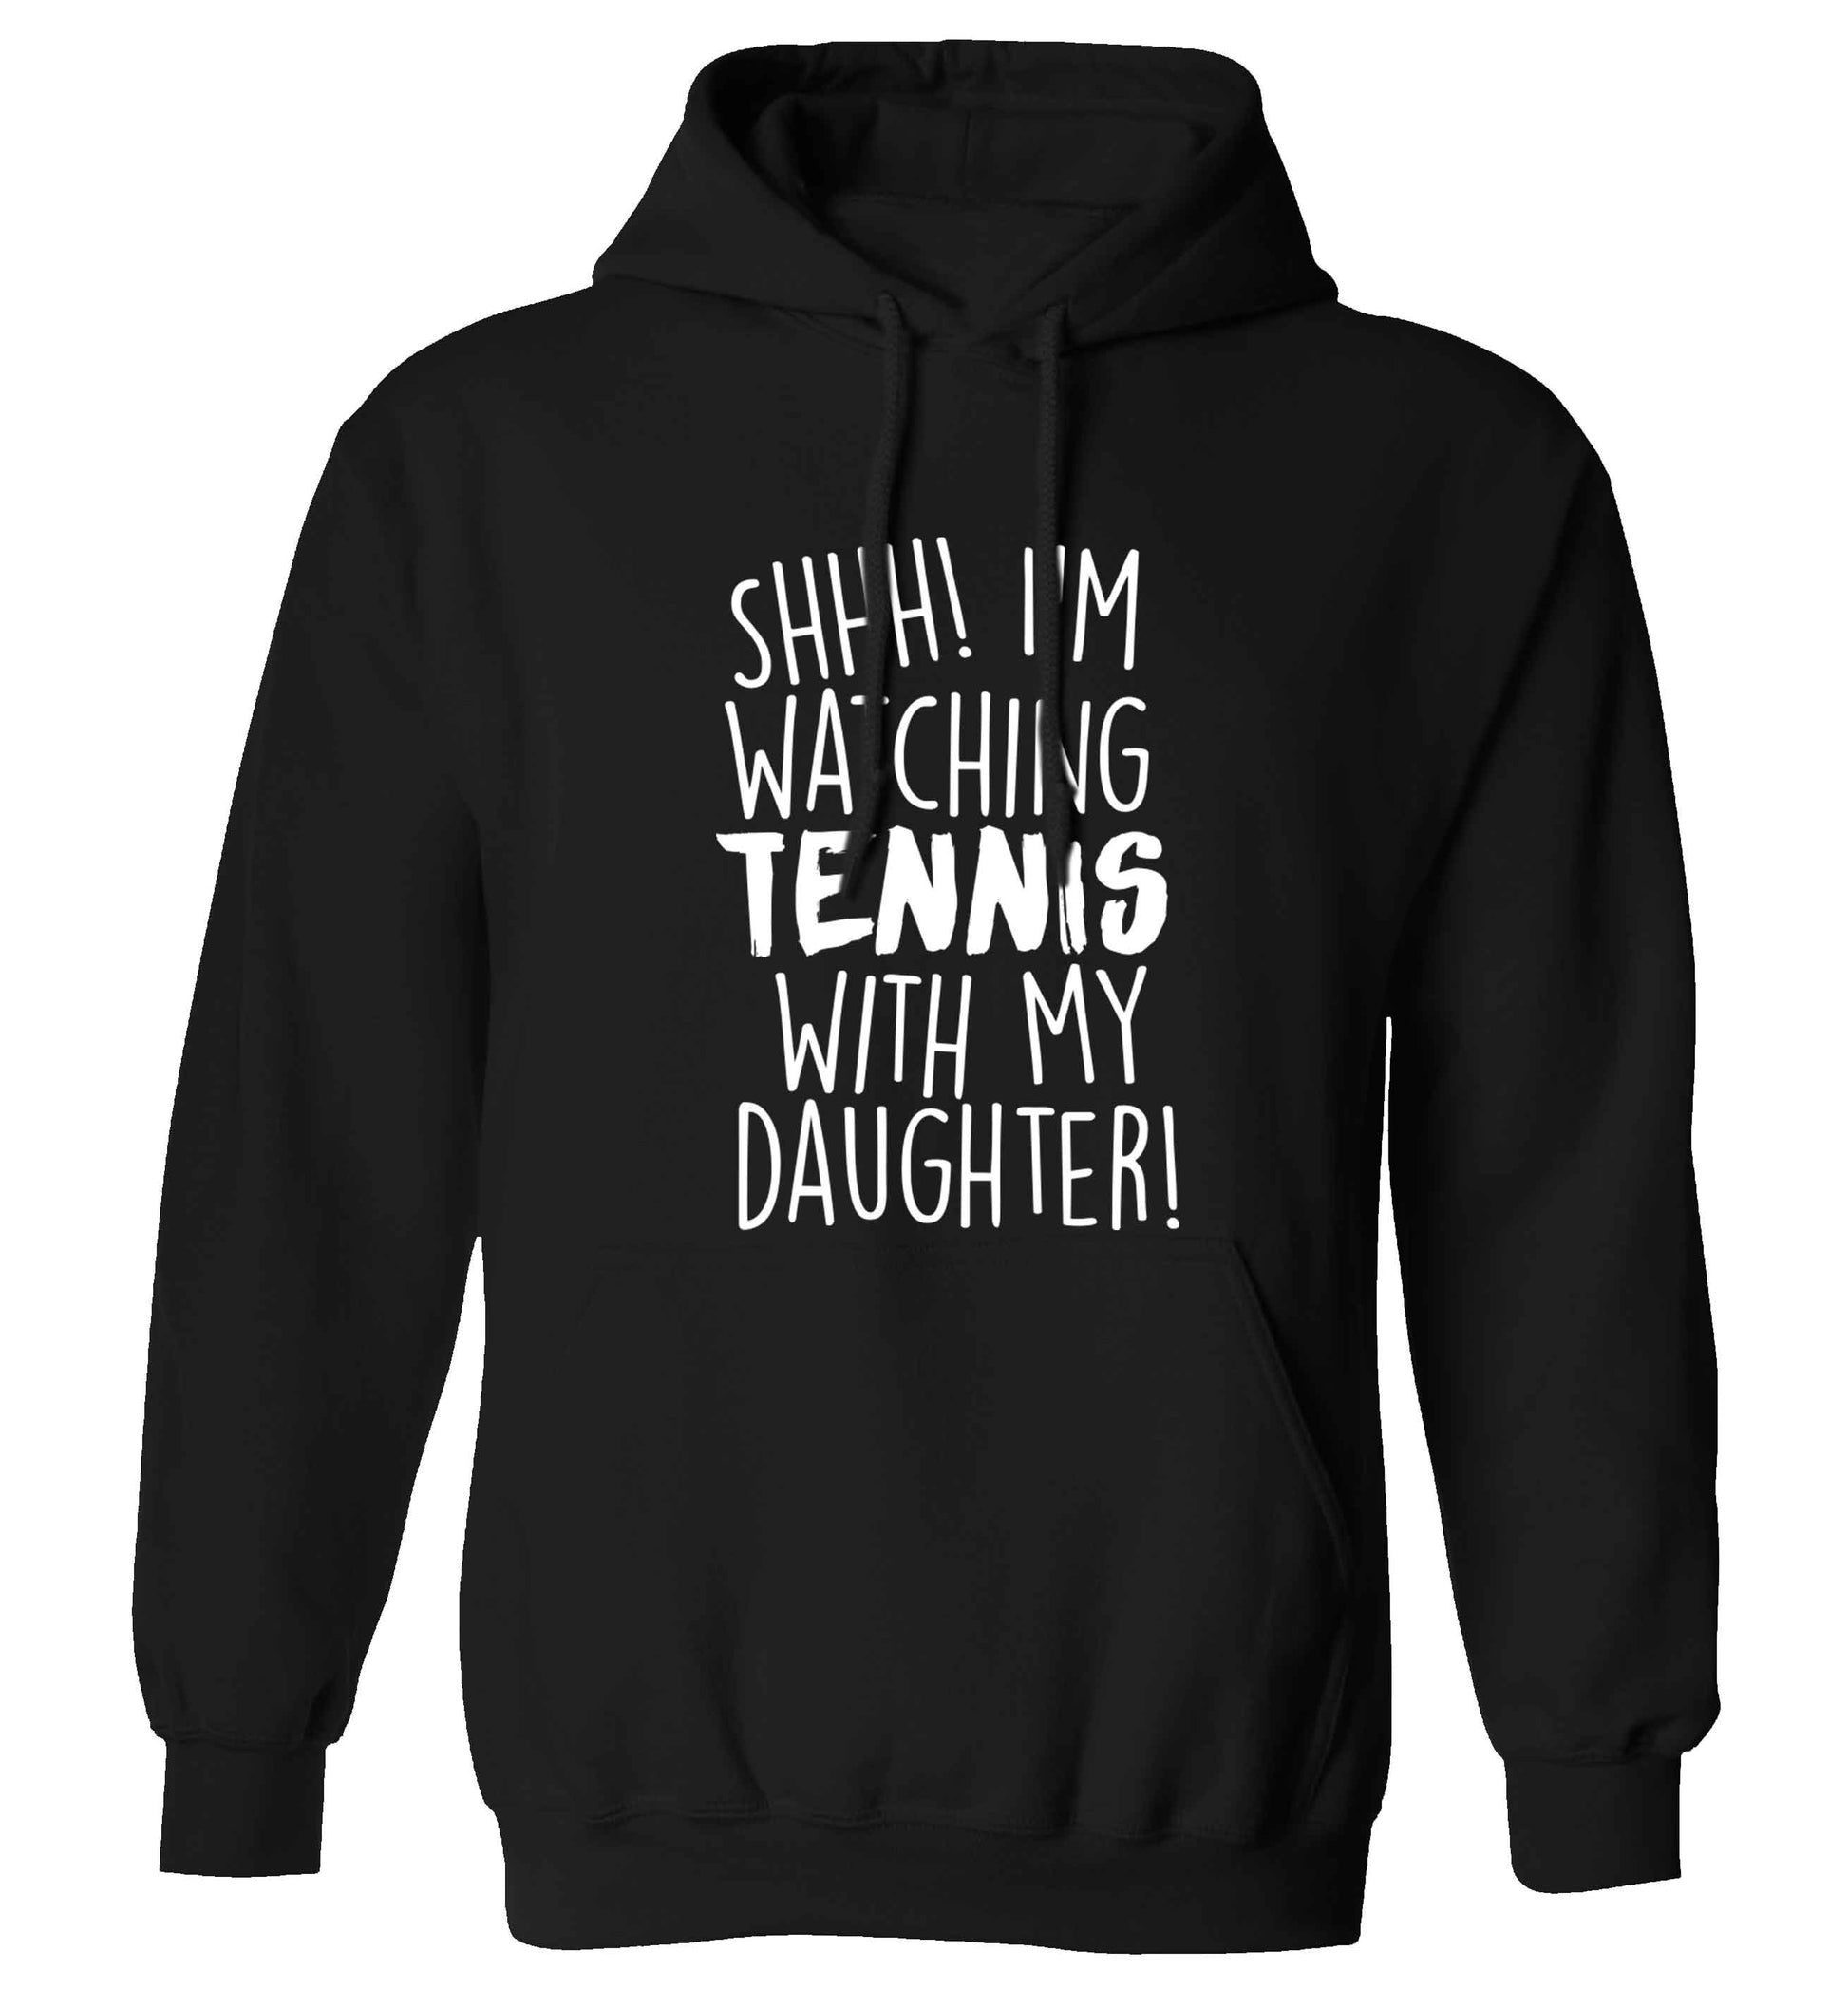 Shh! I'm watching tennis with my daughter! adults unisex black hoodie 2XL